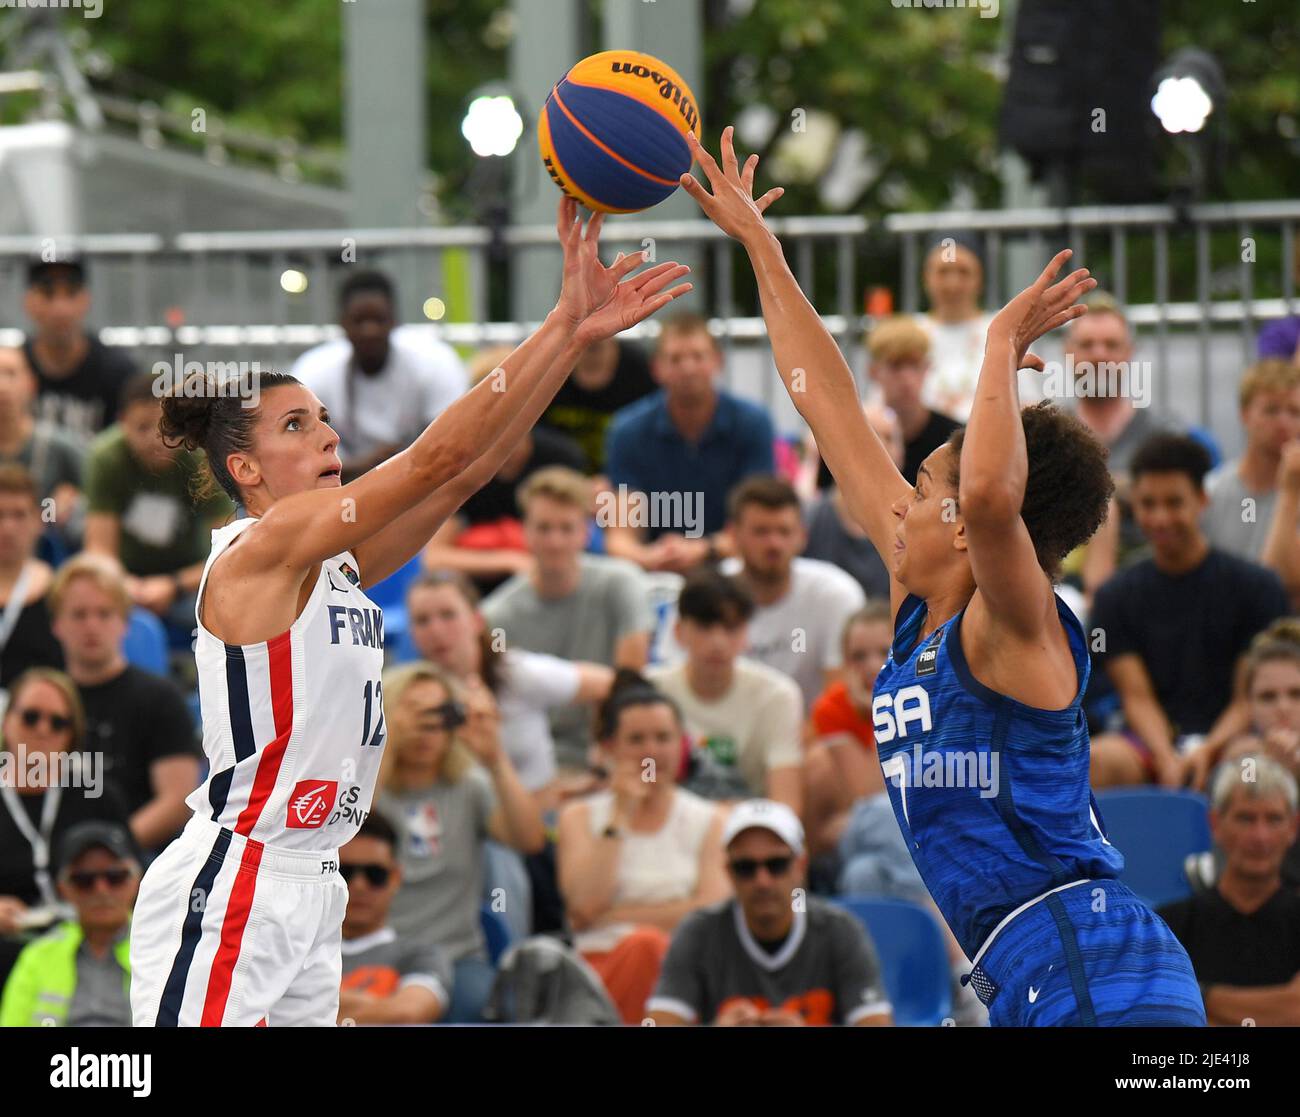 Antwerp, Belgium. 24th June, 2022. Laetitia Guapo (L) of France shoots under the defense of Cierra Burdick of the United States during the FIBA 3X3 World Cup women's pool round match between the United States and France in Antwerp, Belgium, June 24, 2022. Credit: Ren Pengfei/Xinhua/Alamy Live News Stock Photo